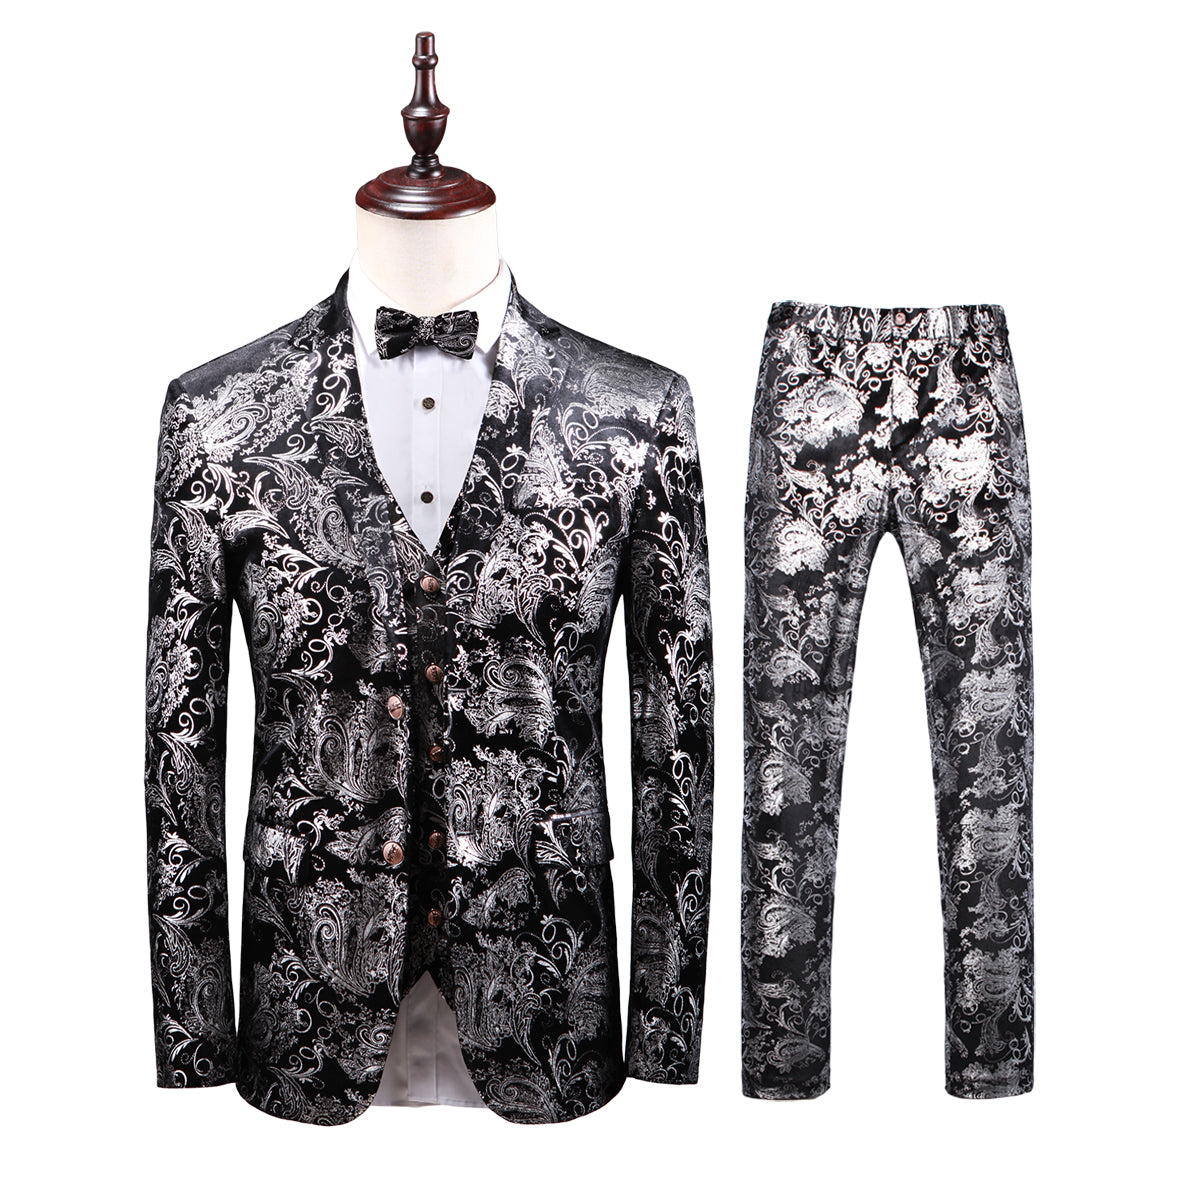 Men's 3 Pieces Printed Tuxedo in Gold Pattern